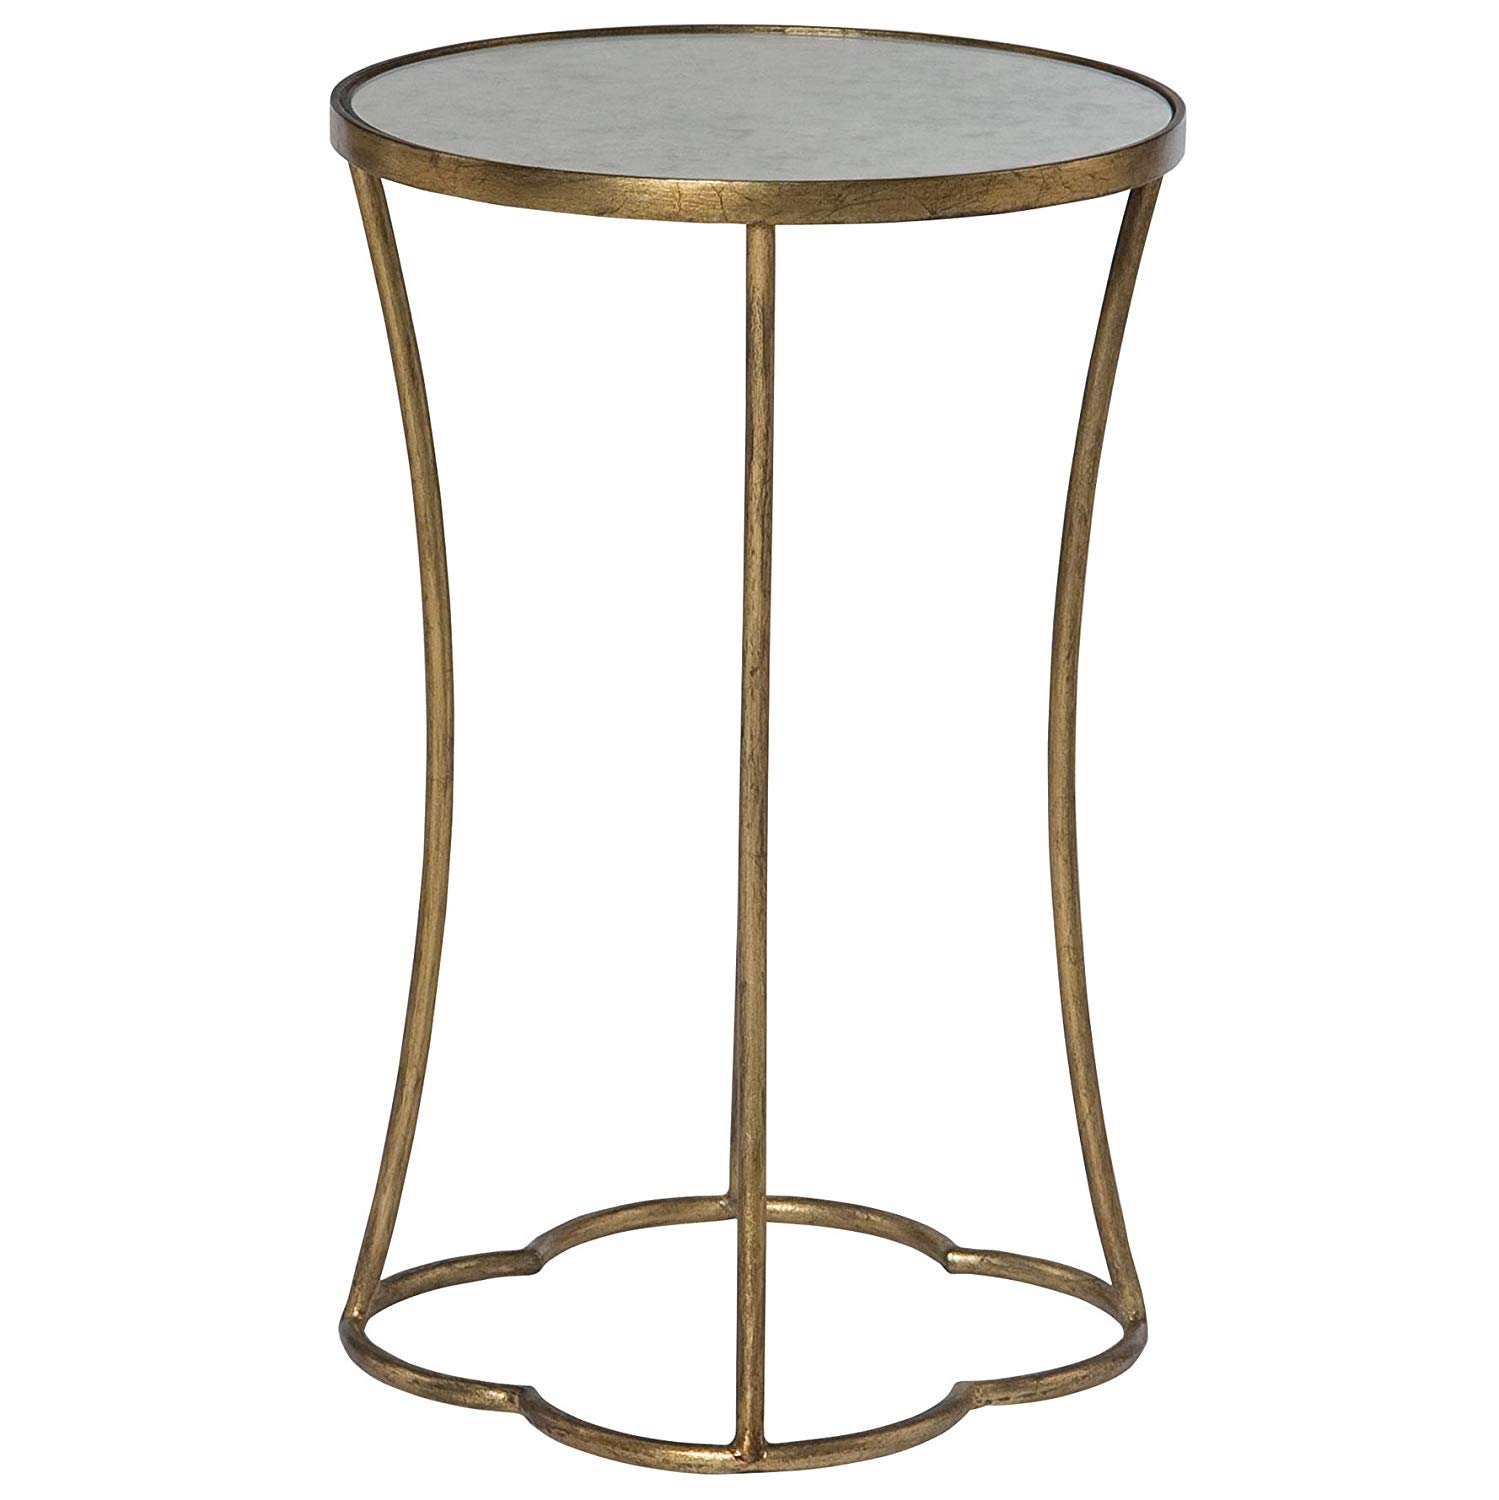 kathy kuo home clarissa hollywood regency antique mirror metal accent table gold leaf side kitchen dining office floor lamps trestle supports console tables pulaski sofa mid